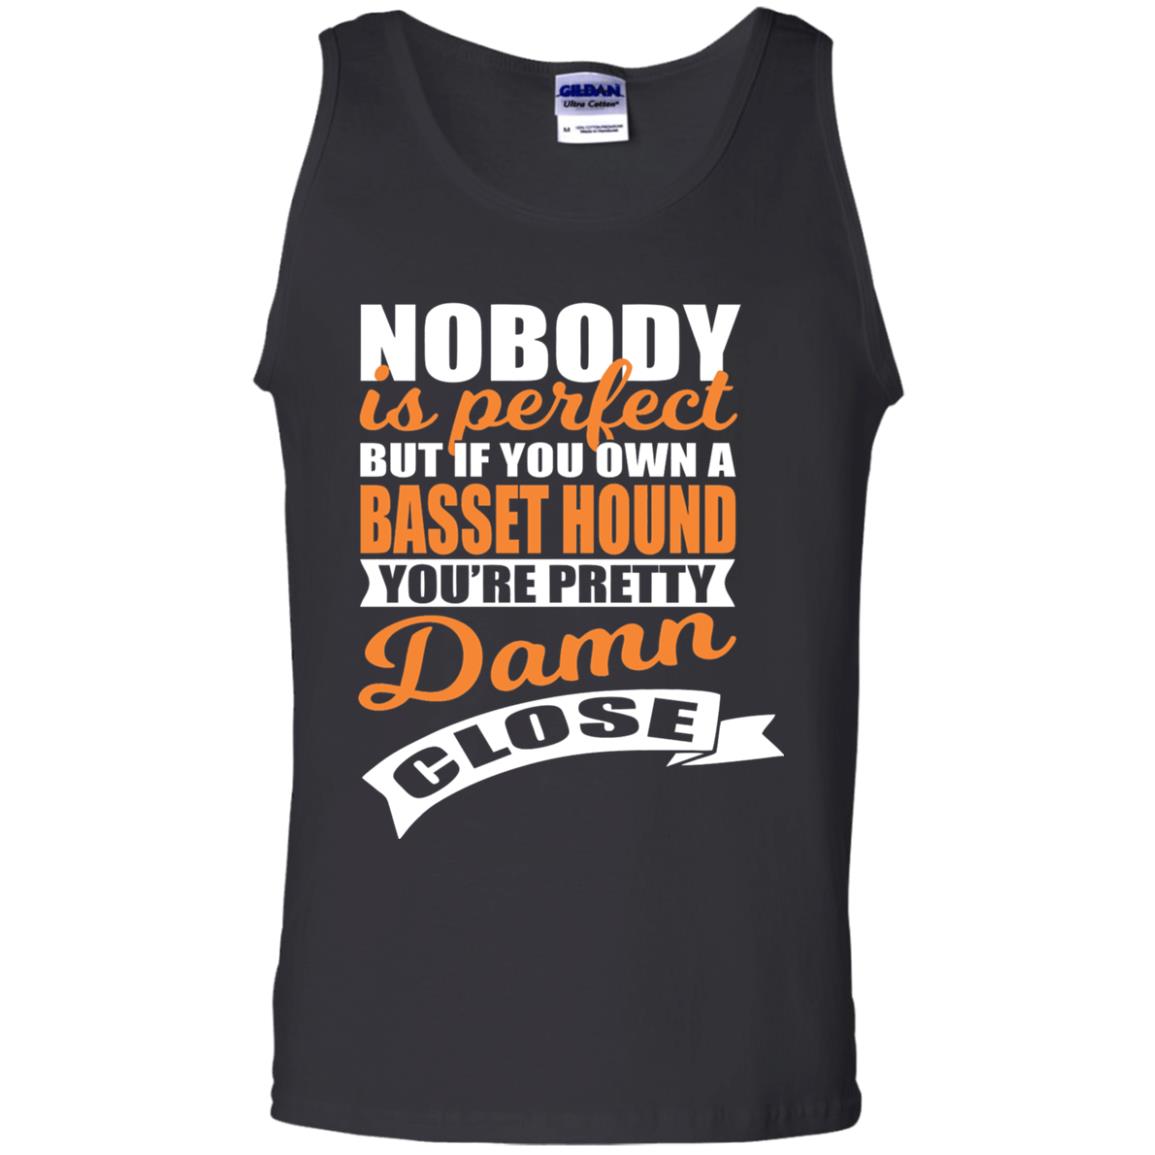 Basset Hound Owner T-shirt Nobody Is Perfect But If You Own A Basset Hound